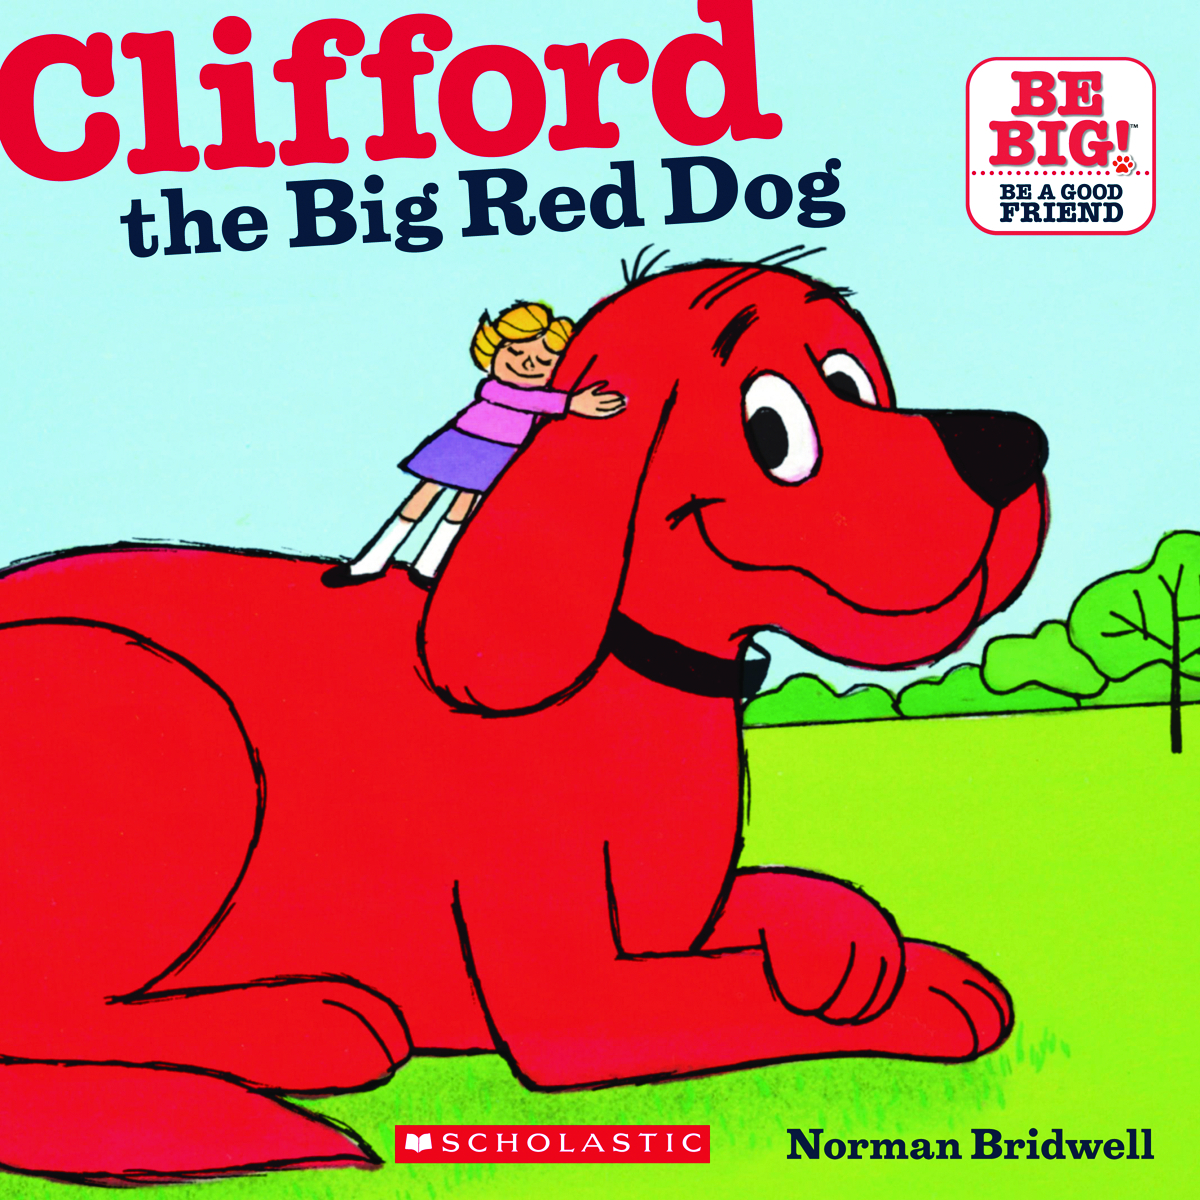 clifford-the-big-red-dog